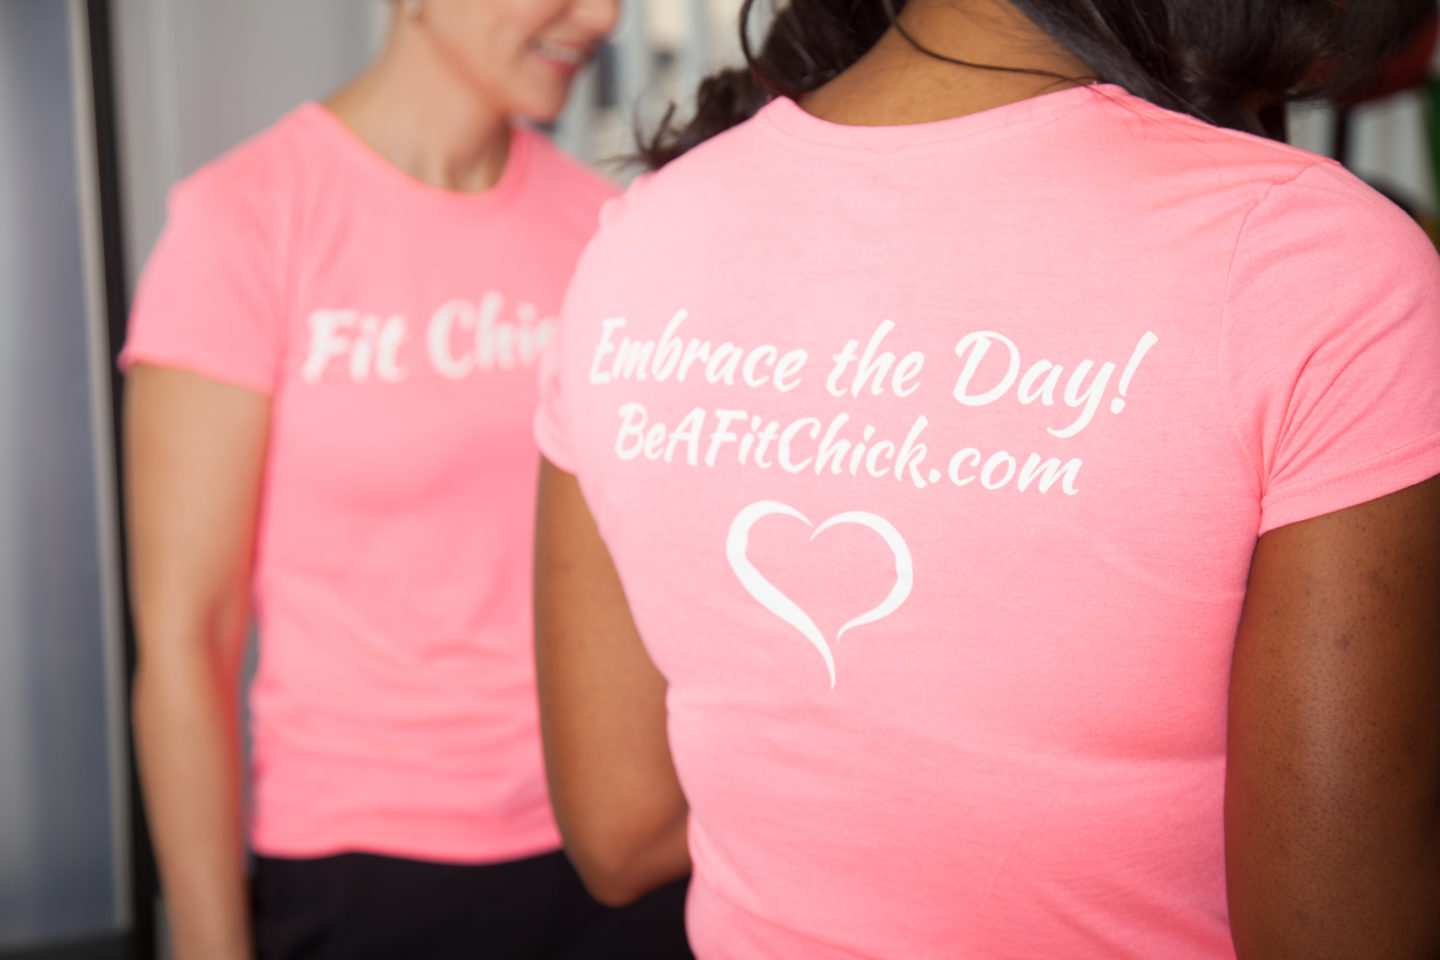 Welcome to the Fit Chicks! Nutrition Seminar